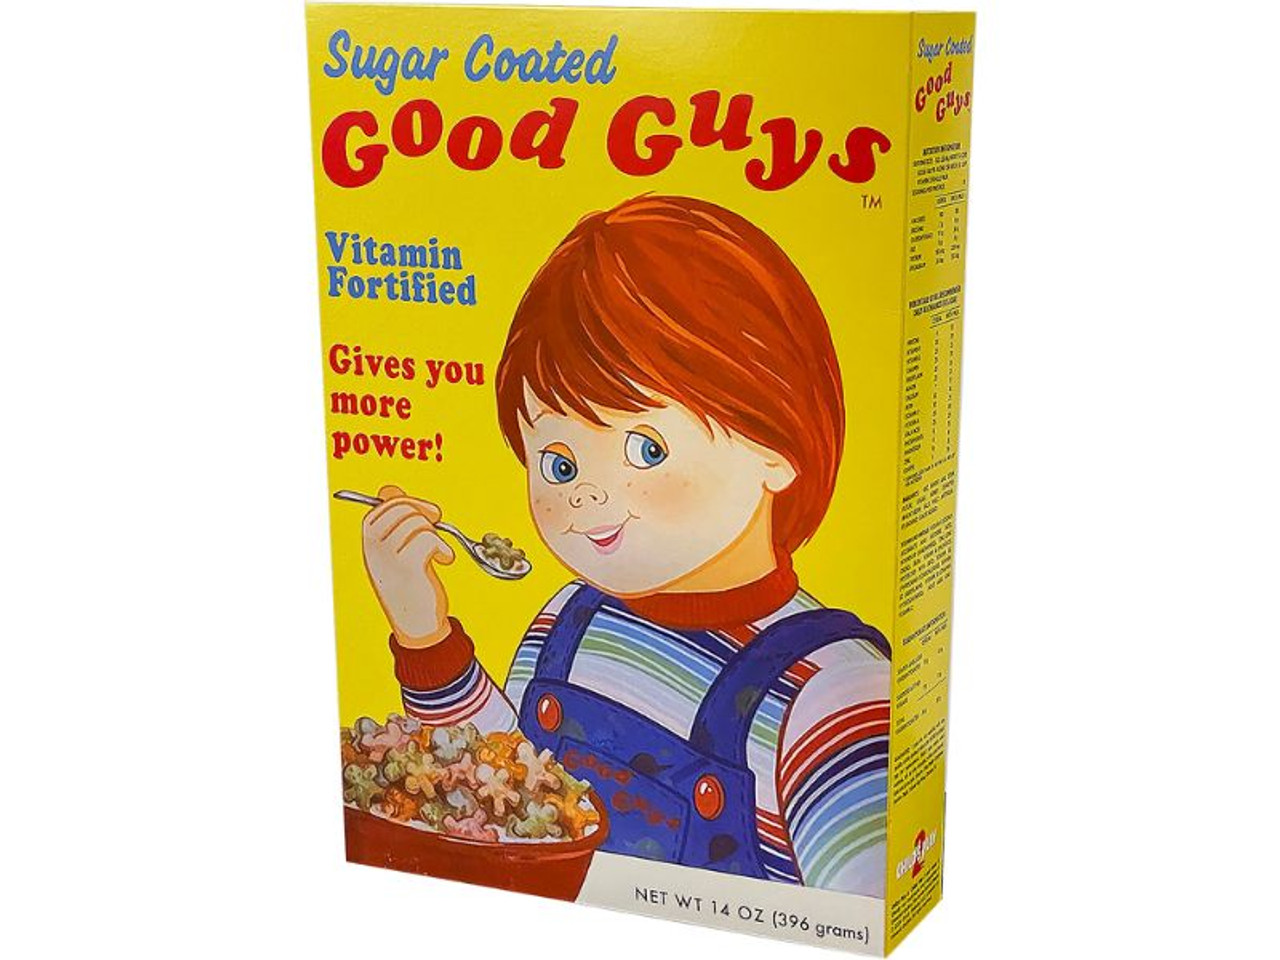 Childs Play 2 Good Guys Cereal Box